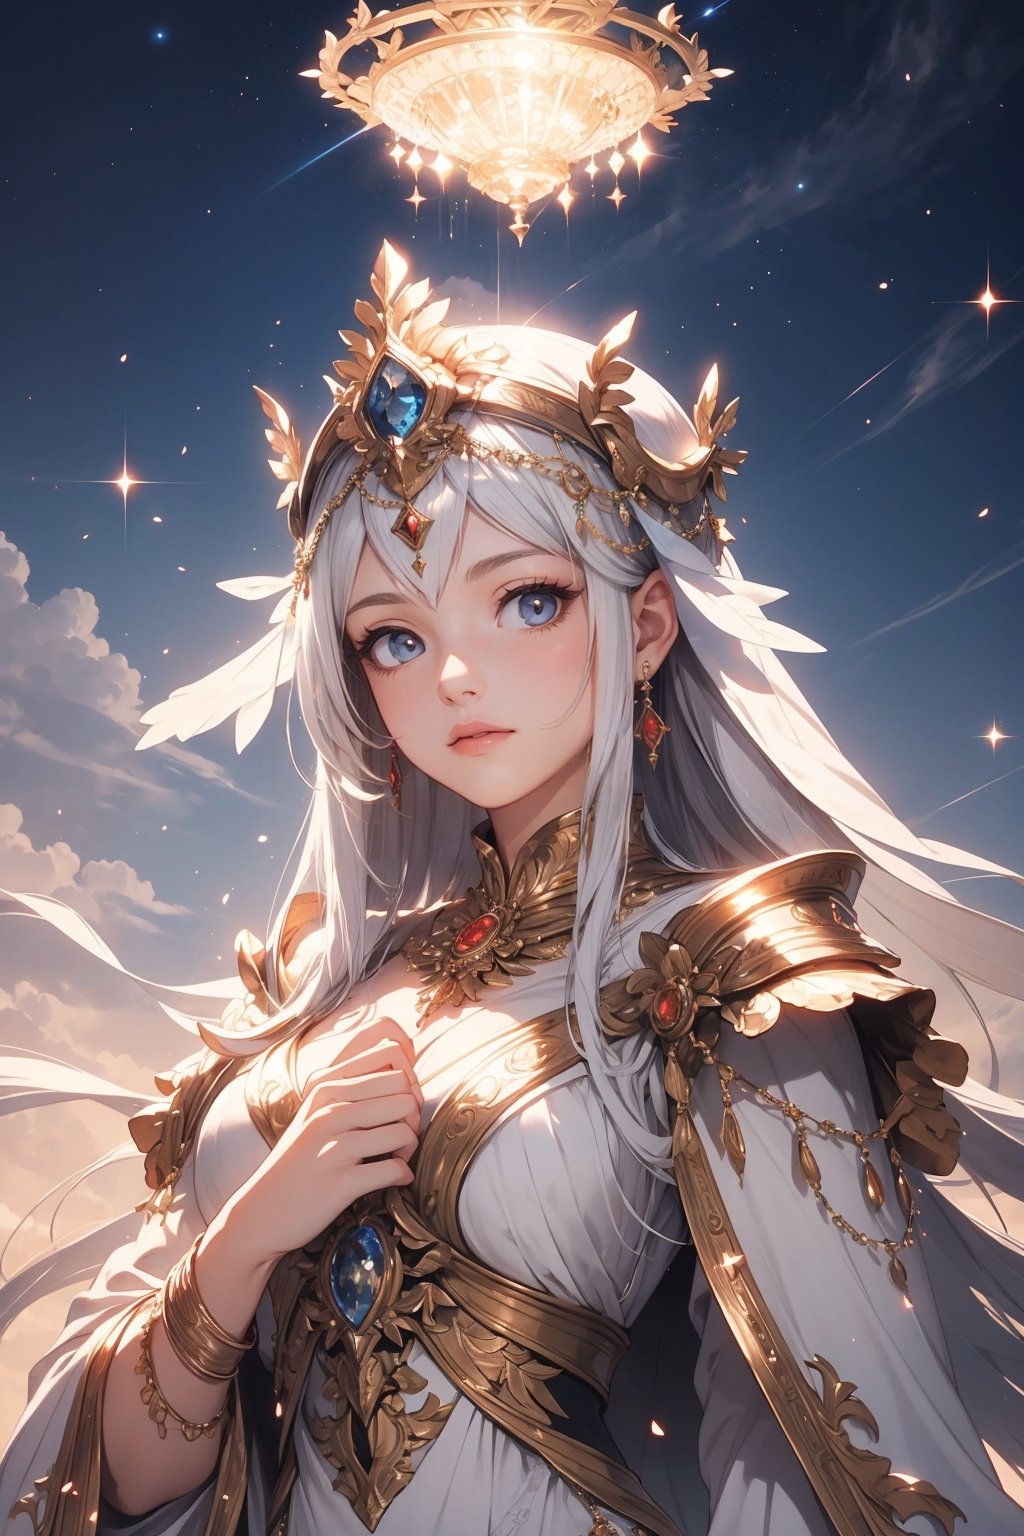 Illuminate Athena, the goddess of wisdom, with a celestial glow. Render in high resolution, capturing both regality and divine intelligence in an ethereal illustrative style.